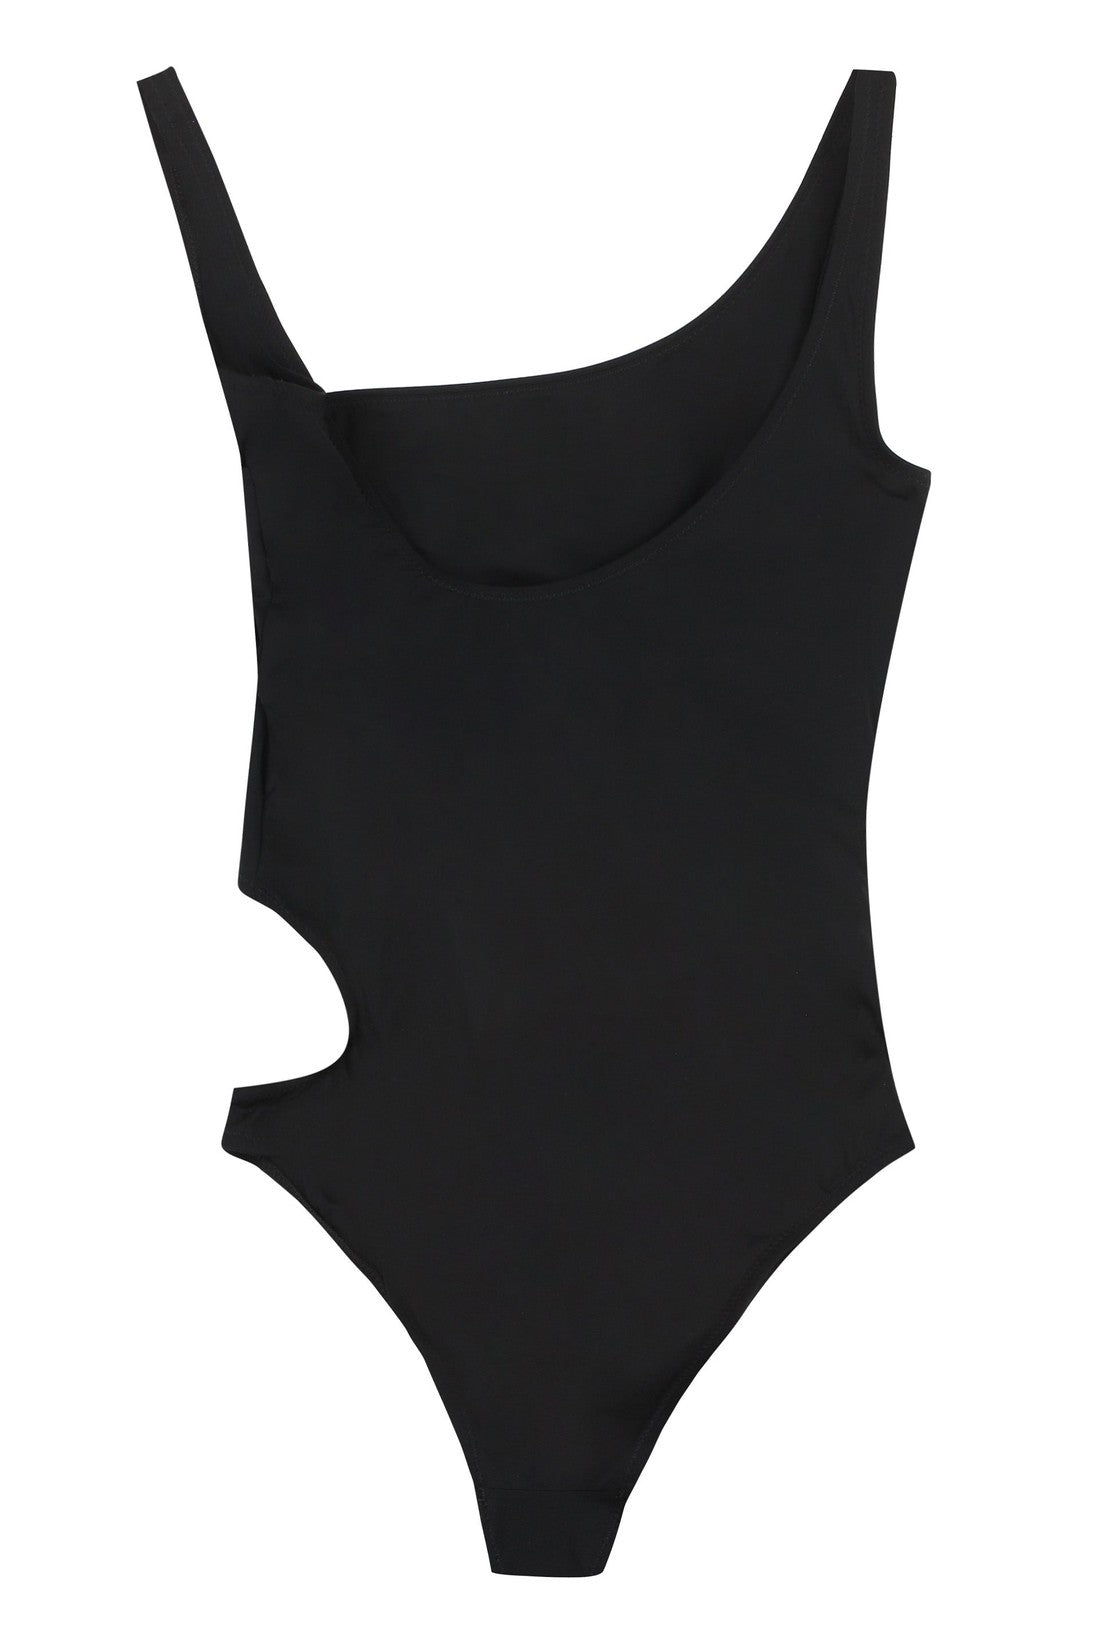 Off-White-OUTLET-SALE-One-piece swimsuit-ARCHIVIST